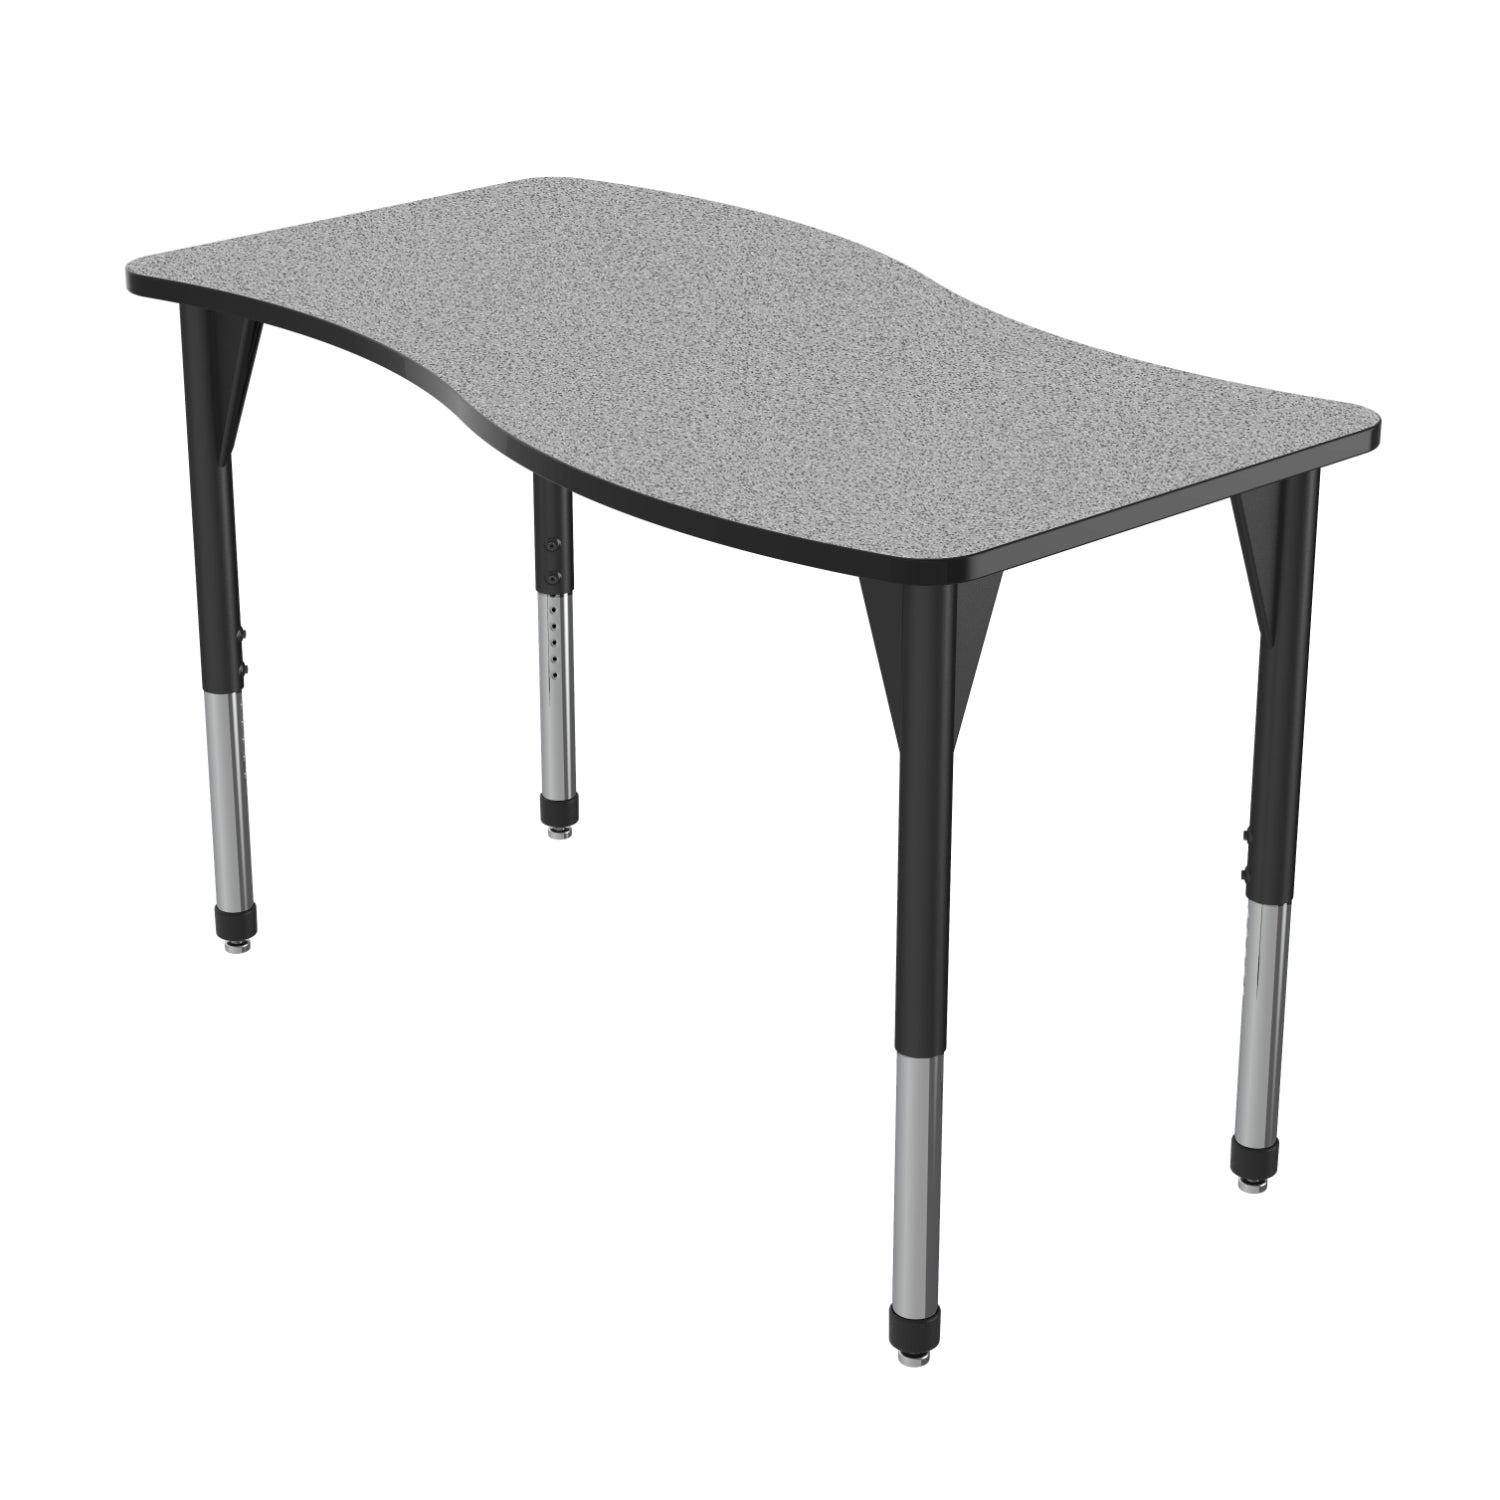 Premier Standing Height Collaborative Classroom Table, 30" x 60" Wave